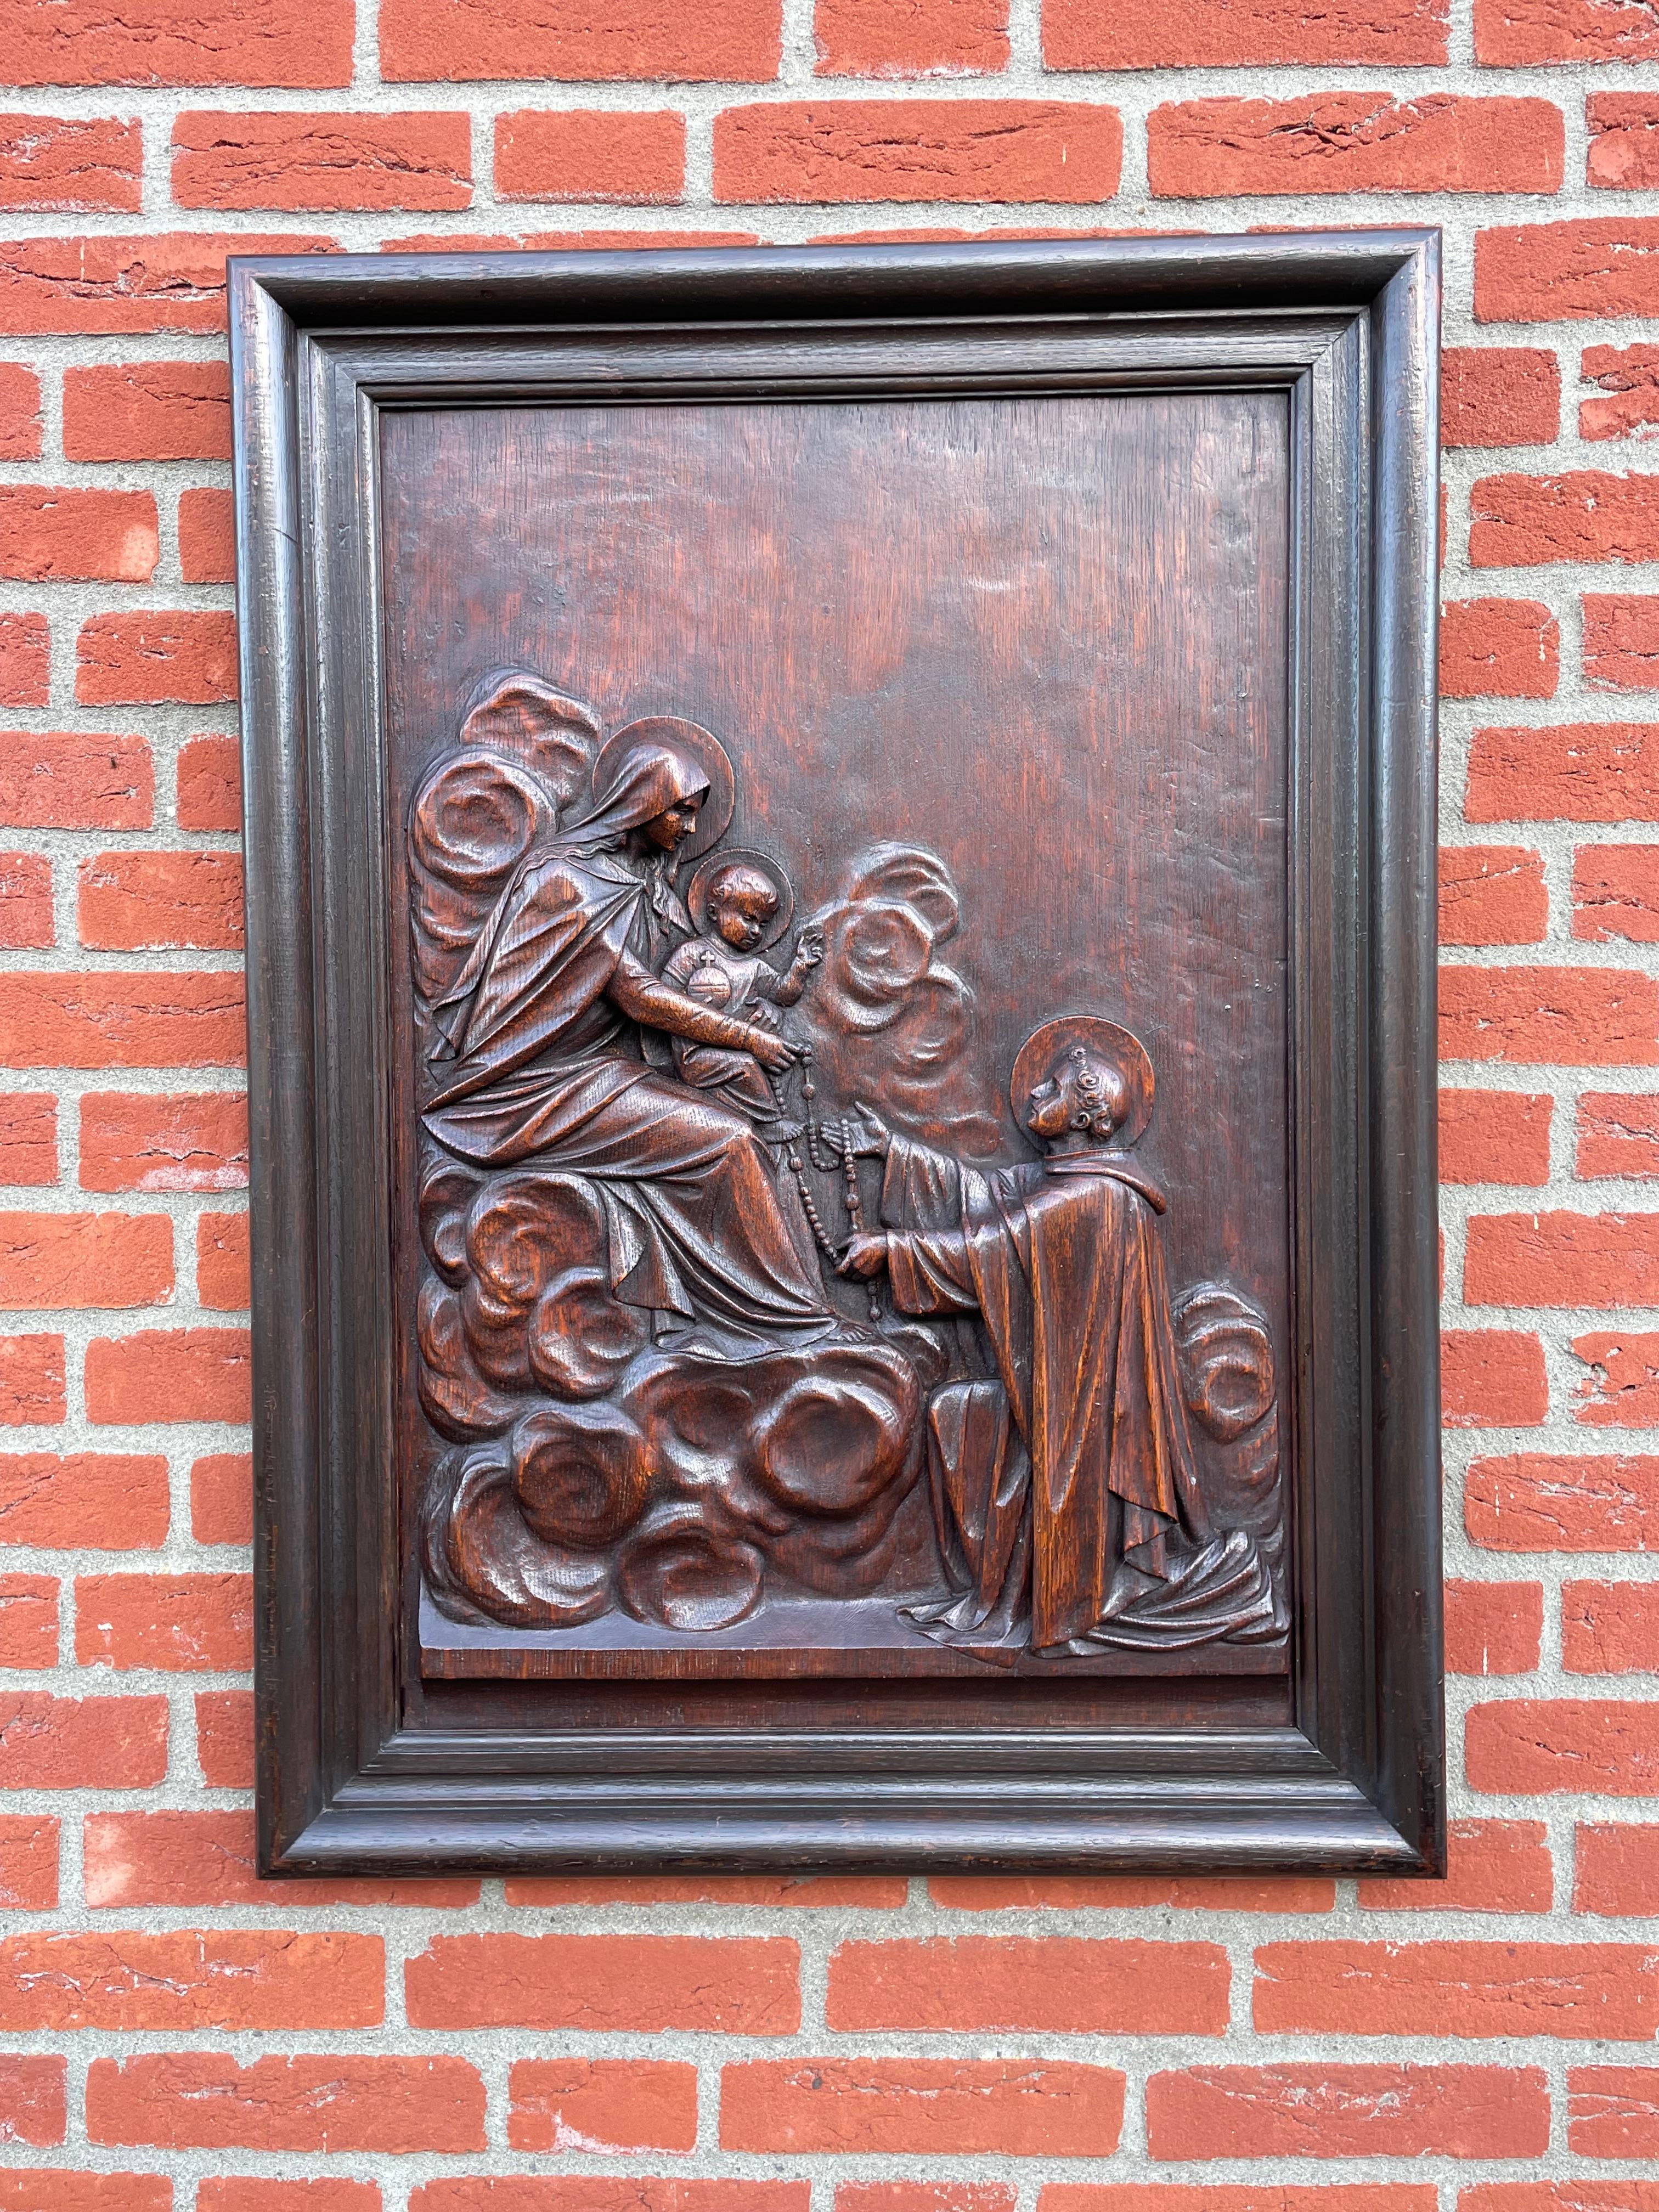 Hand carved, ecclesiastical wall sculpture from the mid 1800s.

With antique church relics being one of our specialities, we have seen the Virgin Mary and Her child Jesus depicted in all kinds of ways and from all kinds of materials. However, we